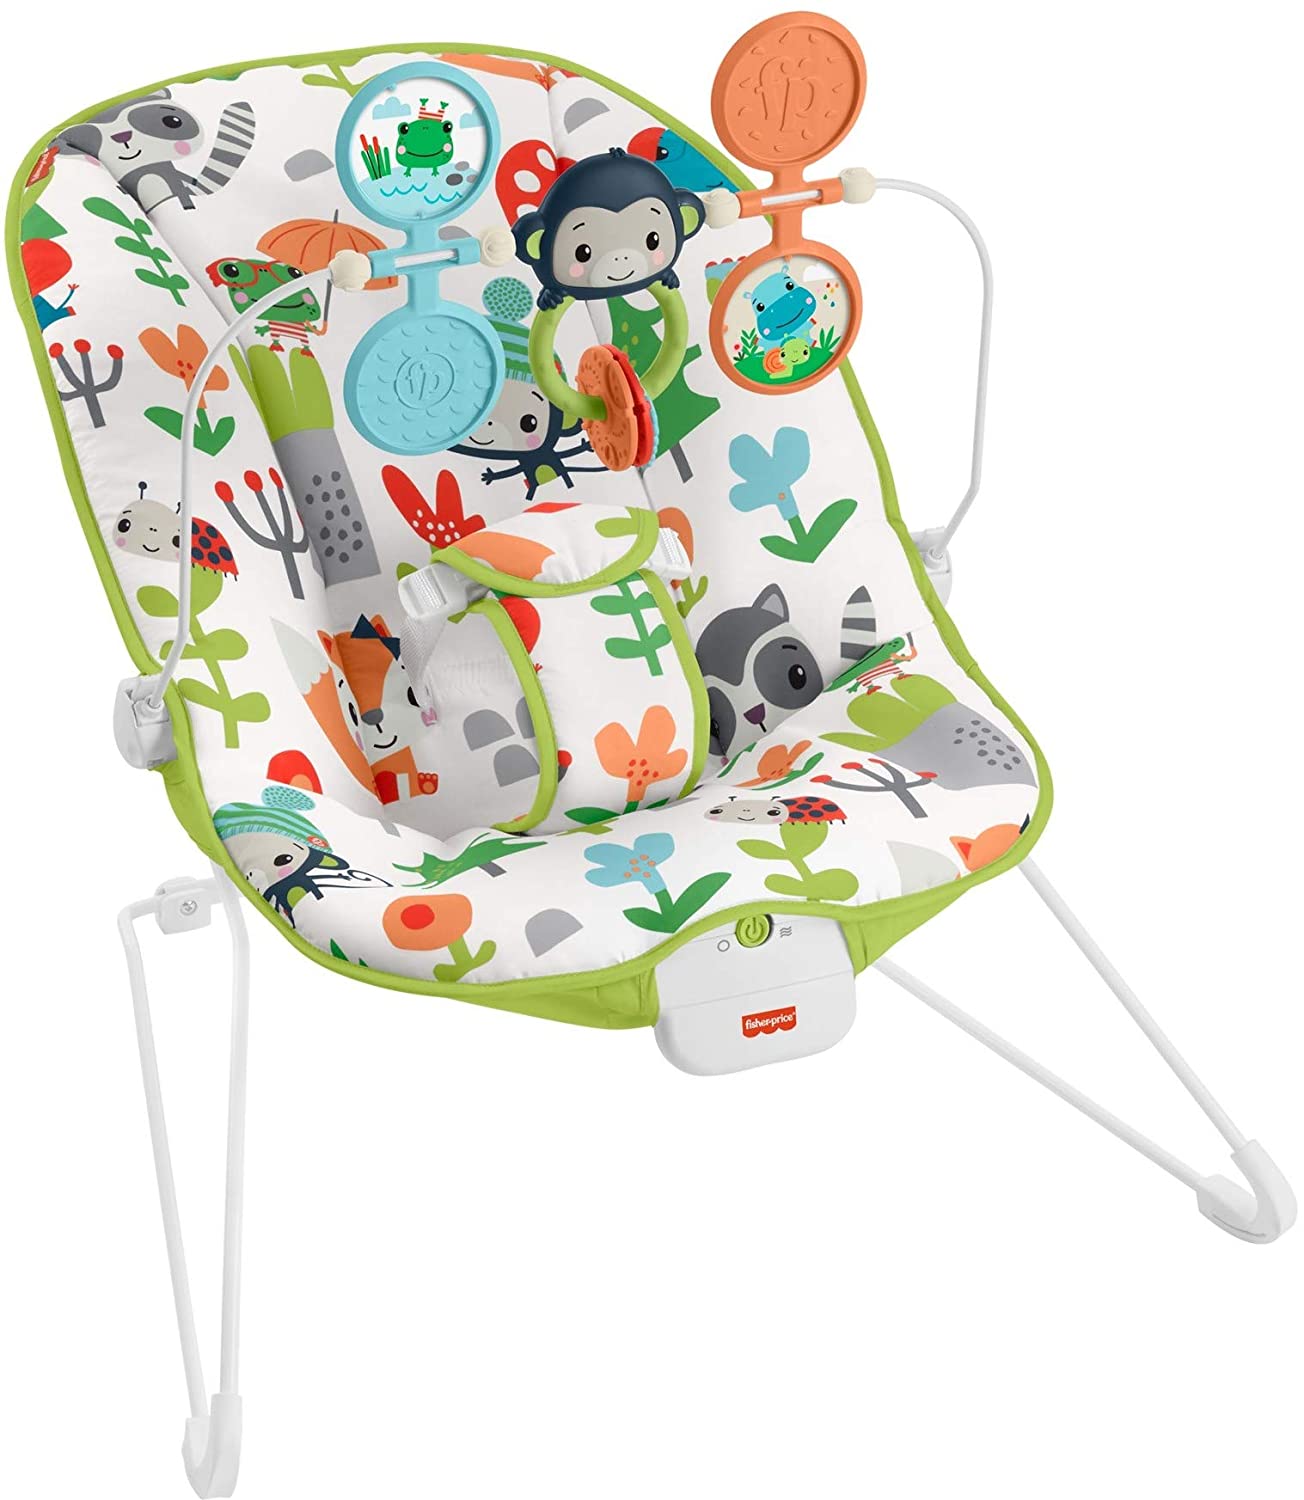 Fisher-Price Baby's Bouncer, Green - for Soothing And Play For Newborns And Infants